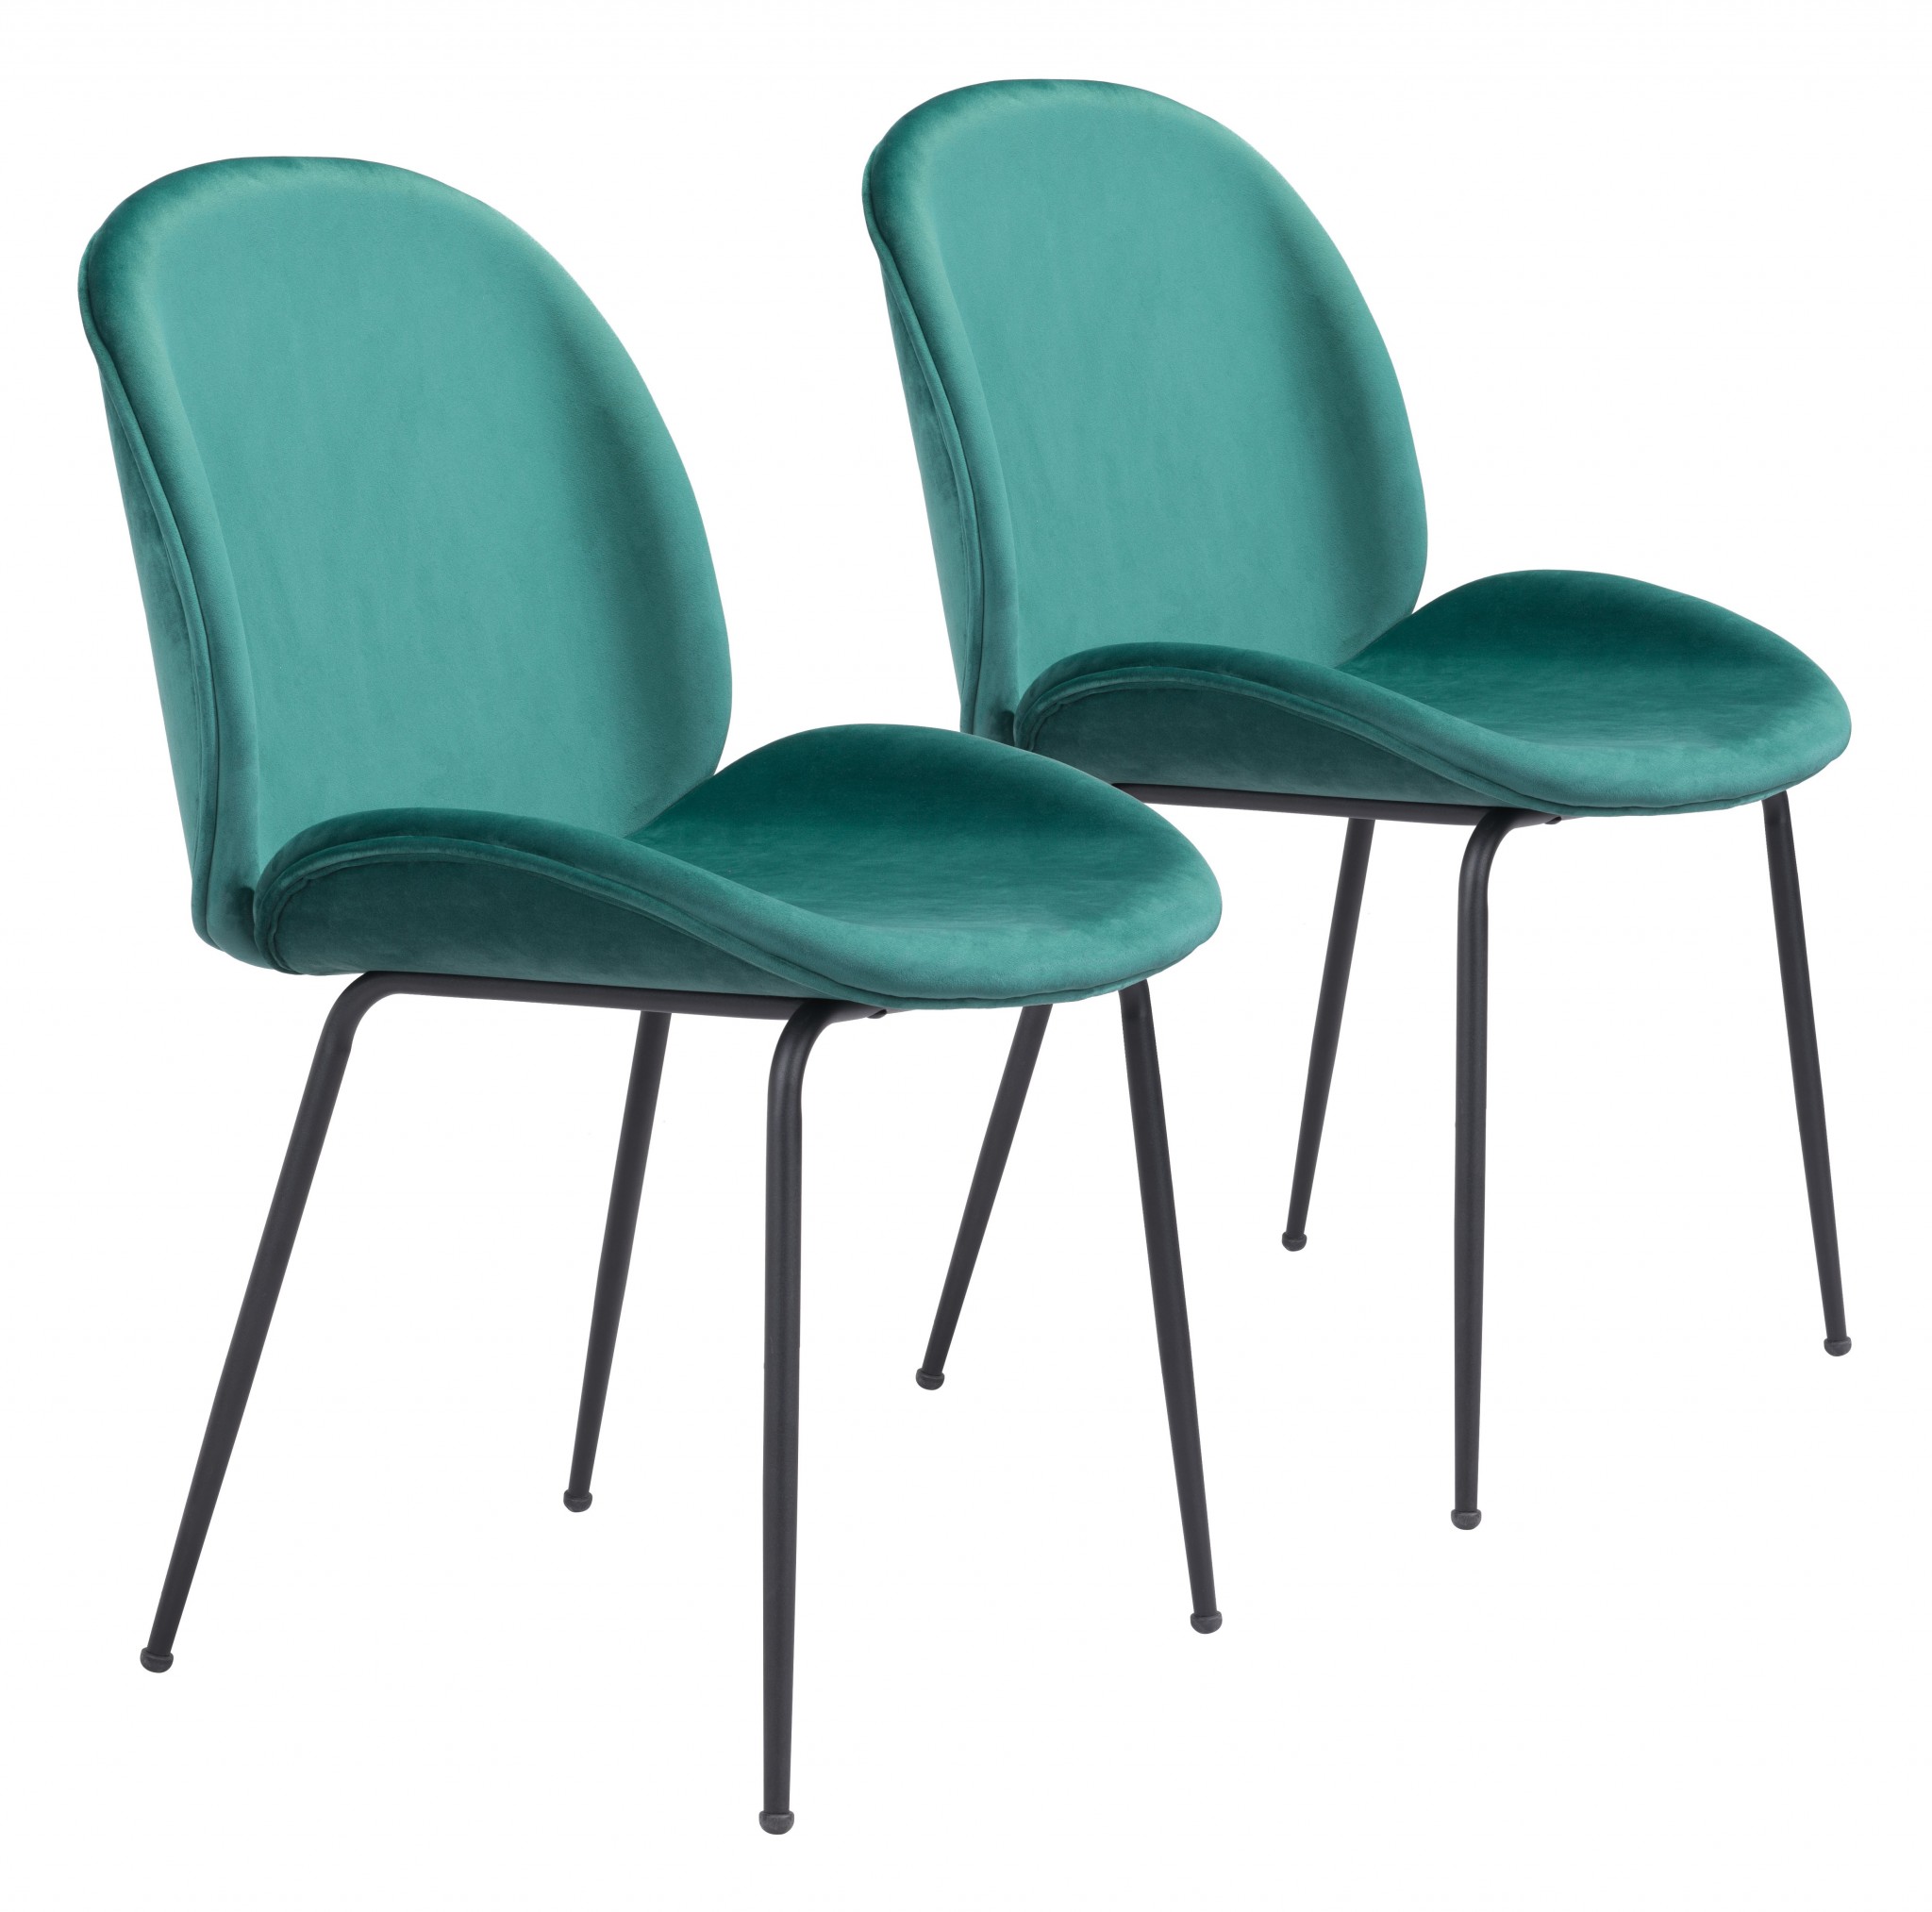 Set of Two Contempo Emerald Green Velvet Dining Chairs